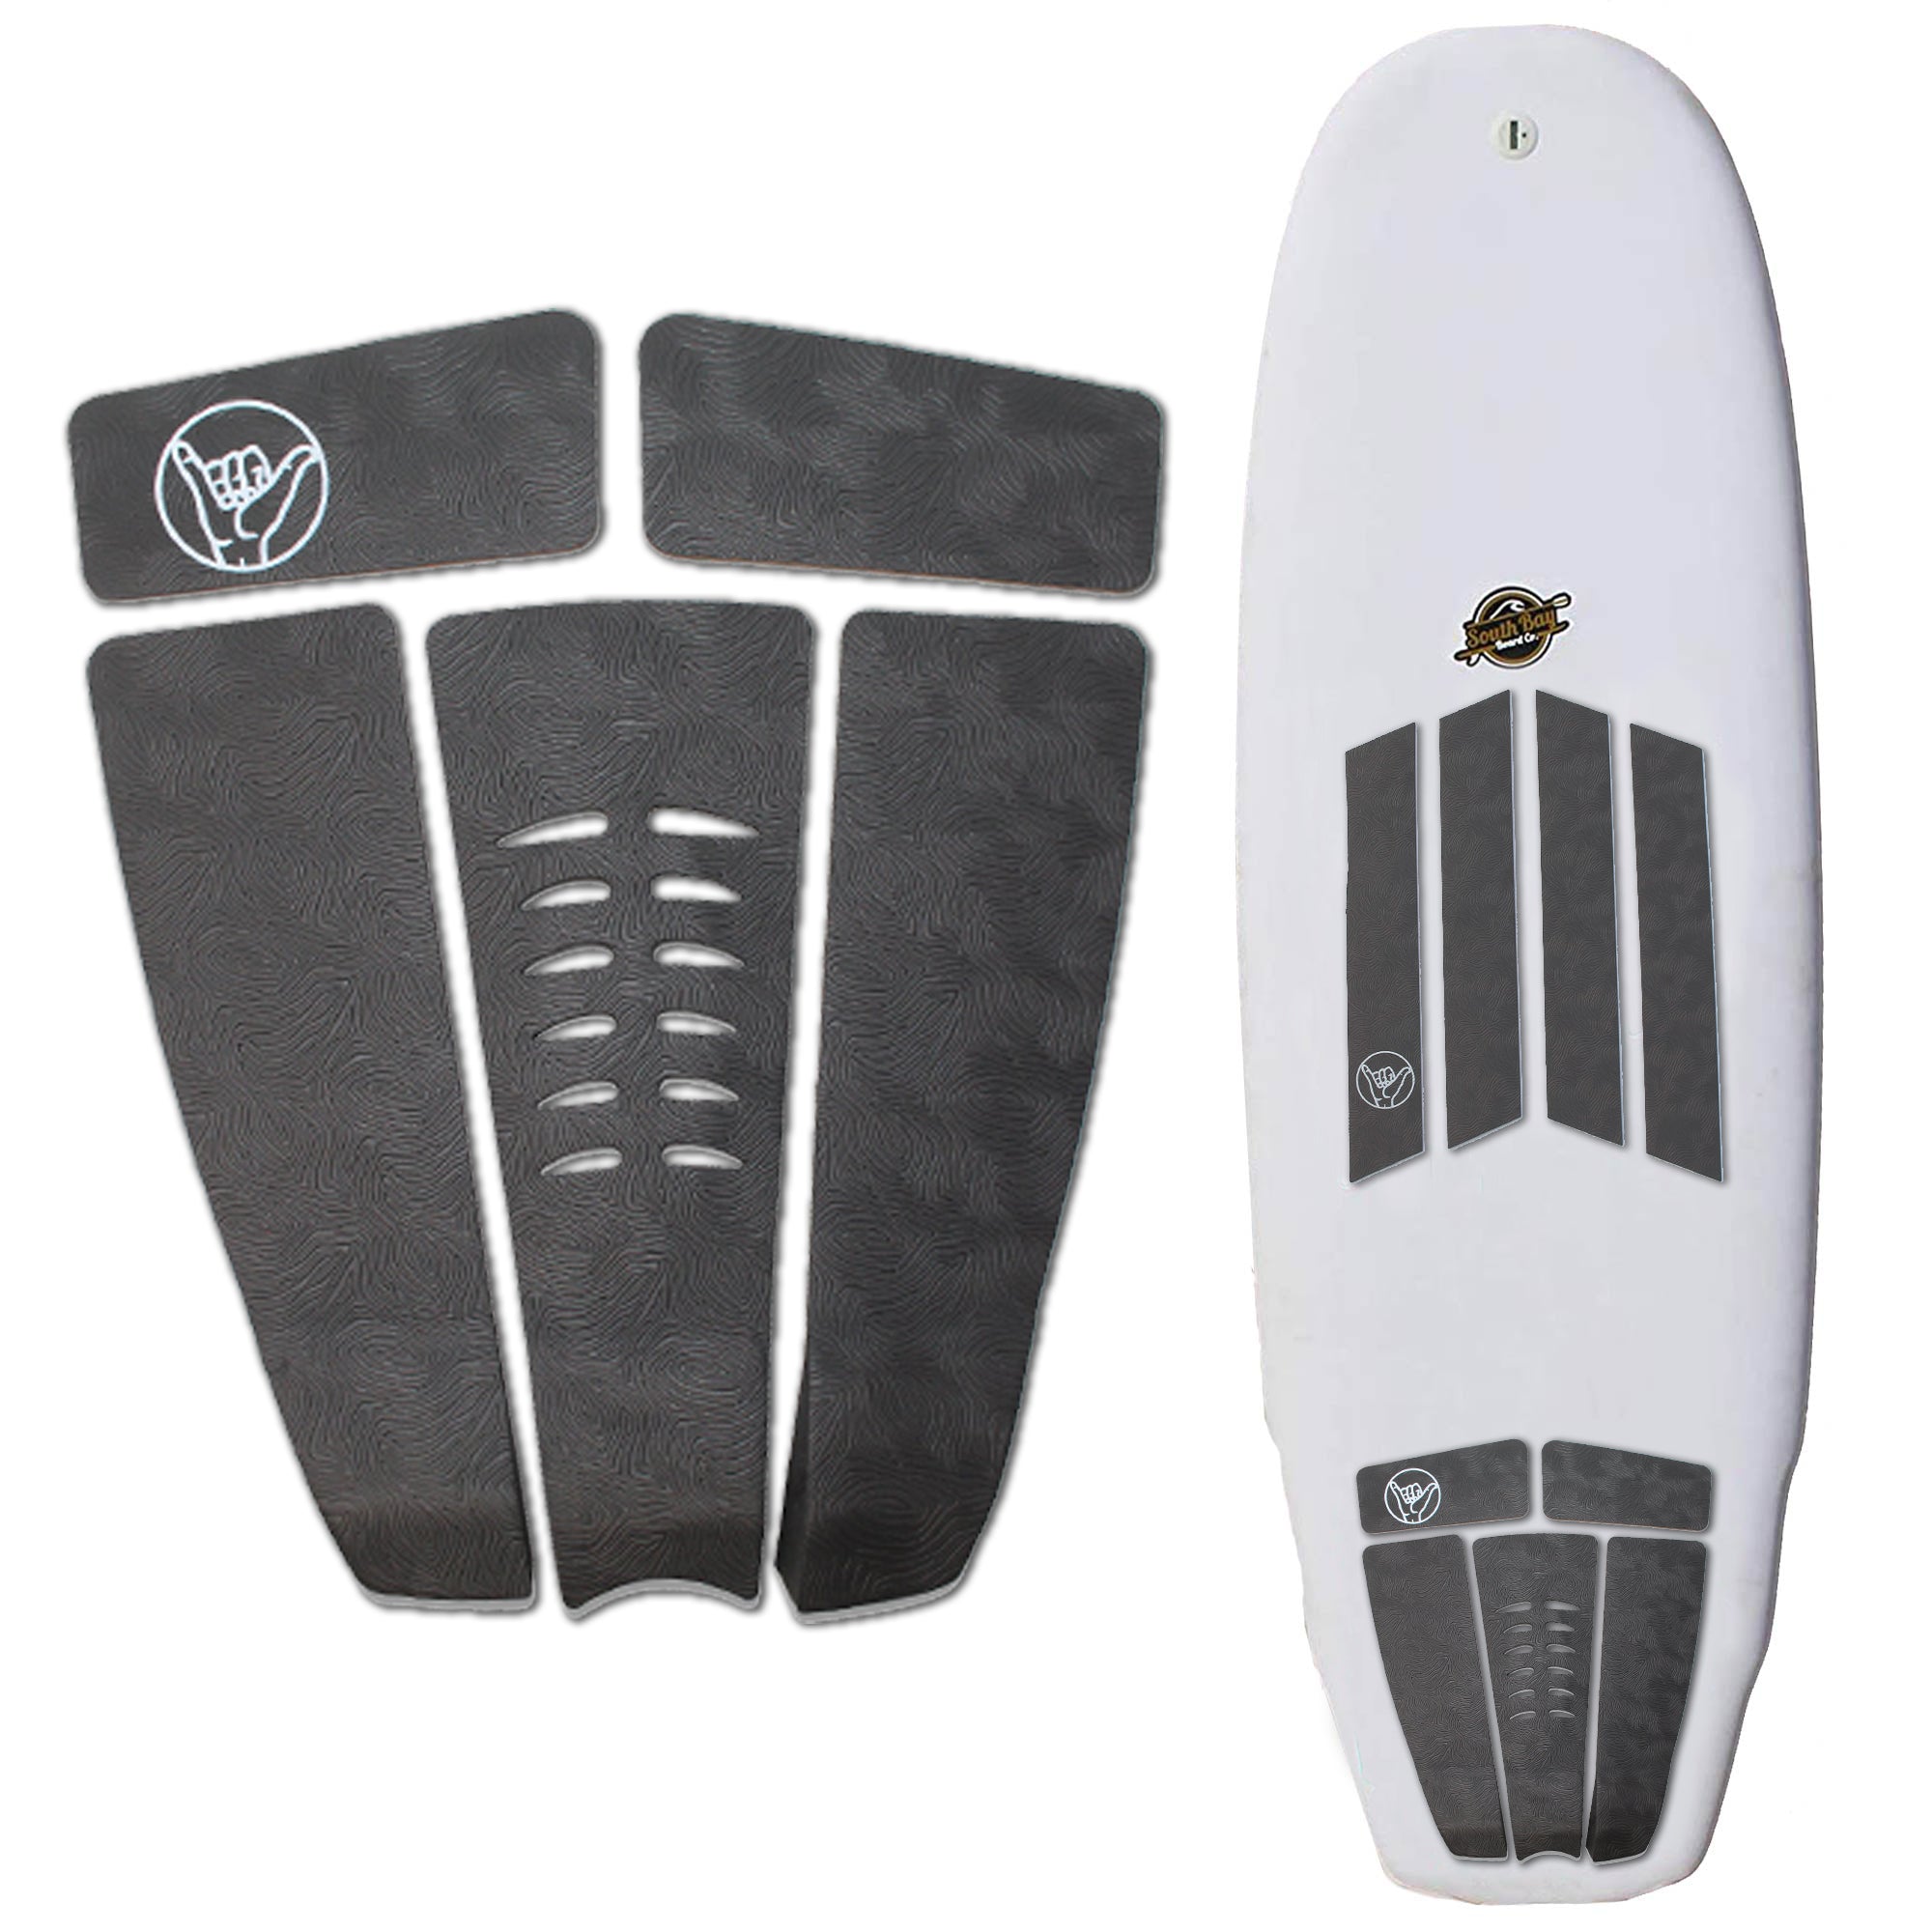 South Bay Board Co. - 5 Piece Traction Pad - The Best Soft Top Surfboards  in the World